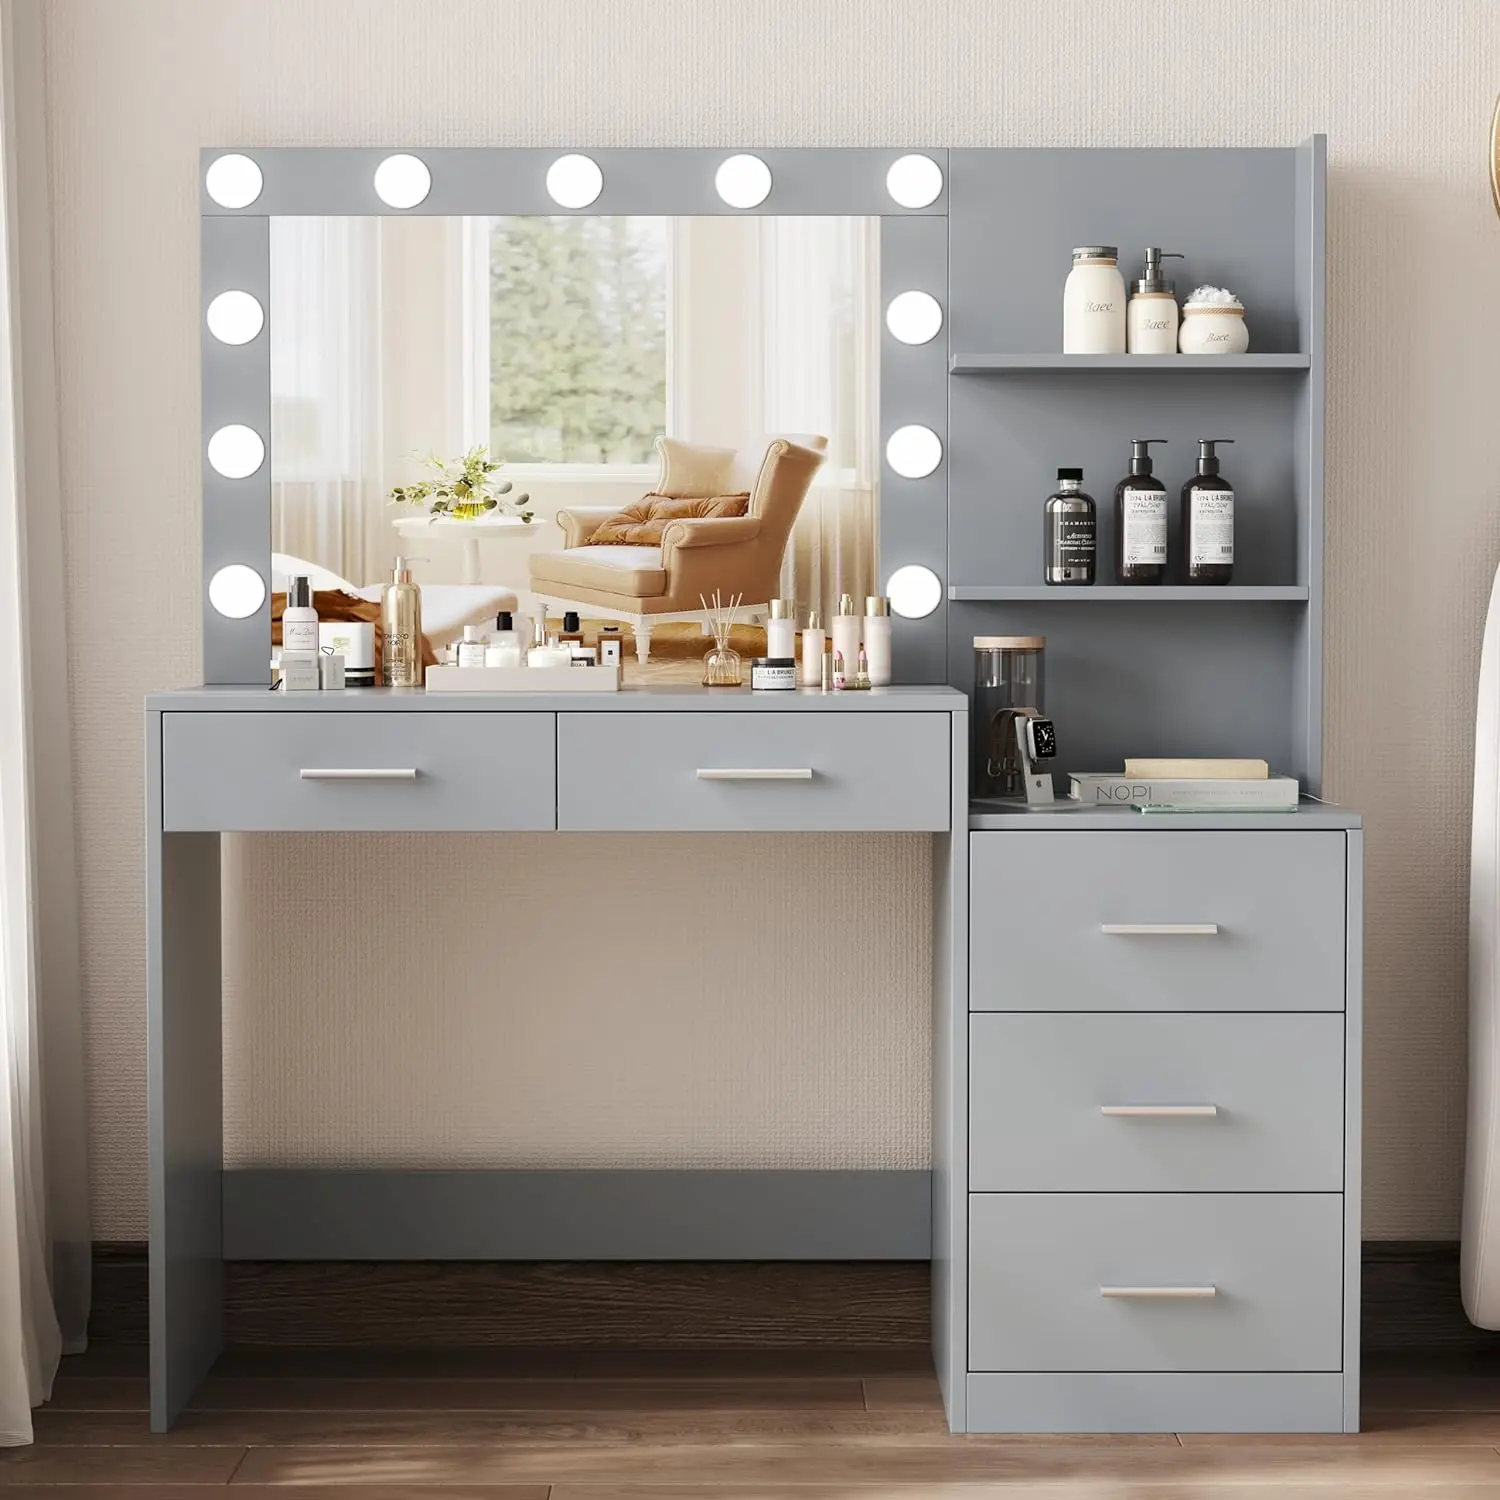 

Rovaurx 46.7" Makeup Vanity Table with Lighted Mirror, Large Vanity Desk with Storage Shelf & 5 Drawers, Bedroom Dressing Table